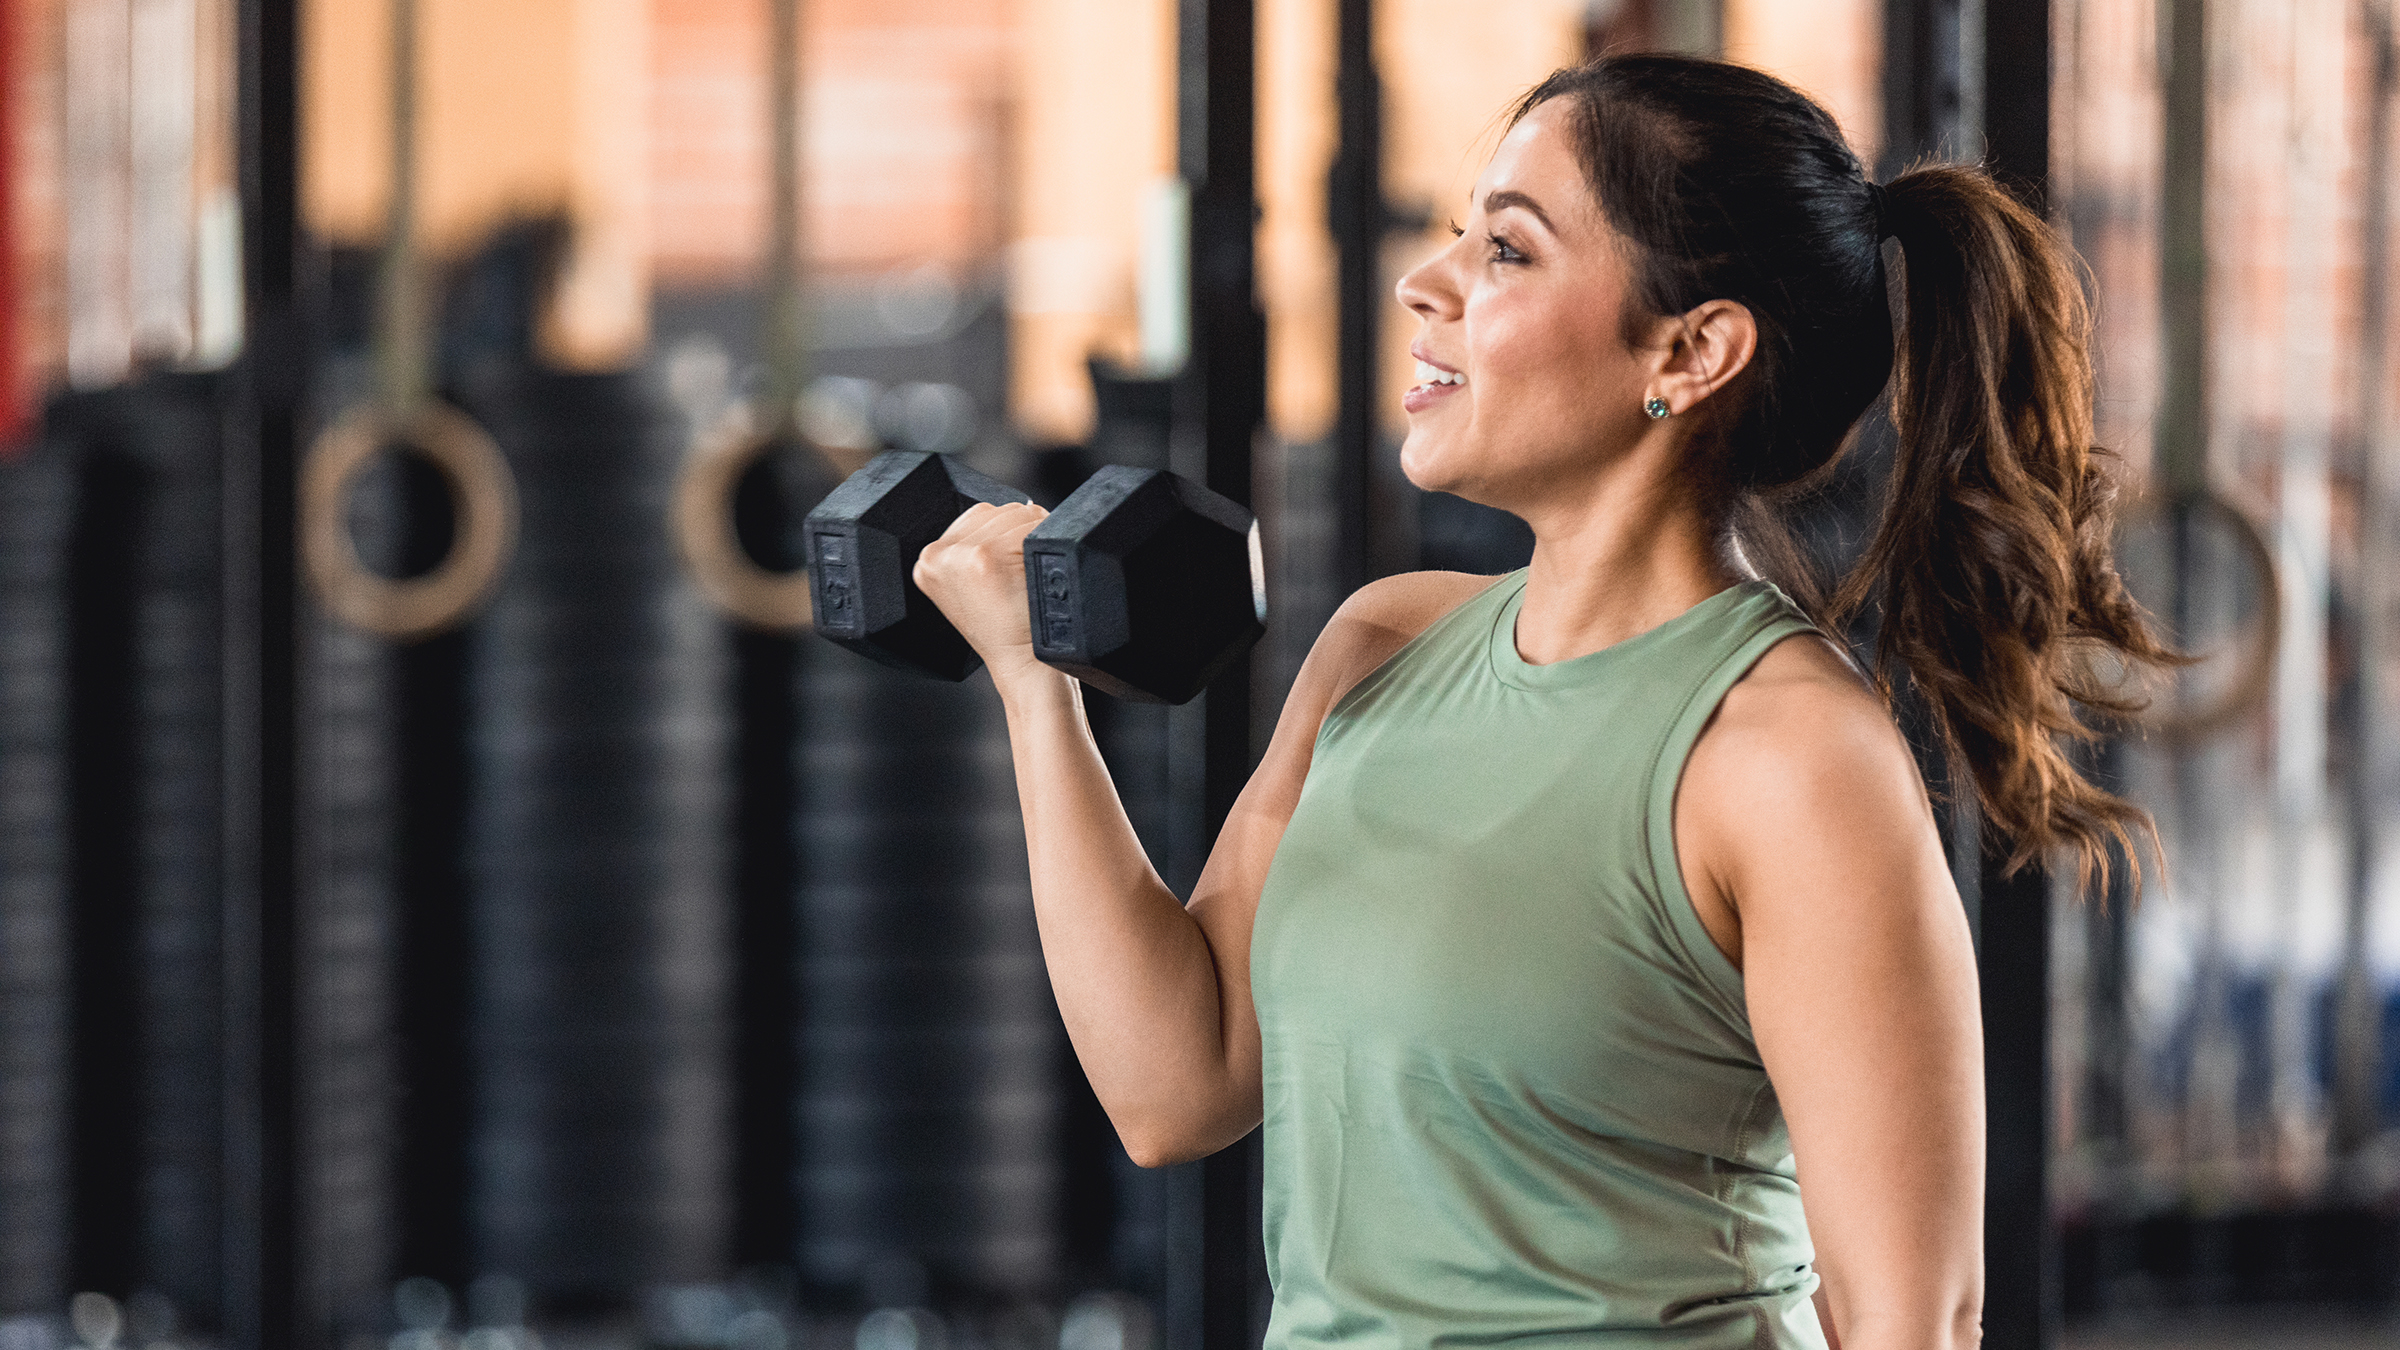 8 Health Benefits of Lifting Weights